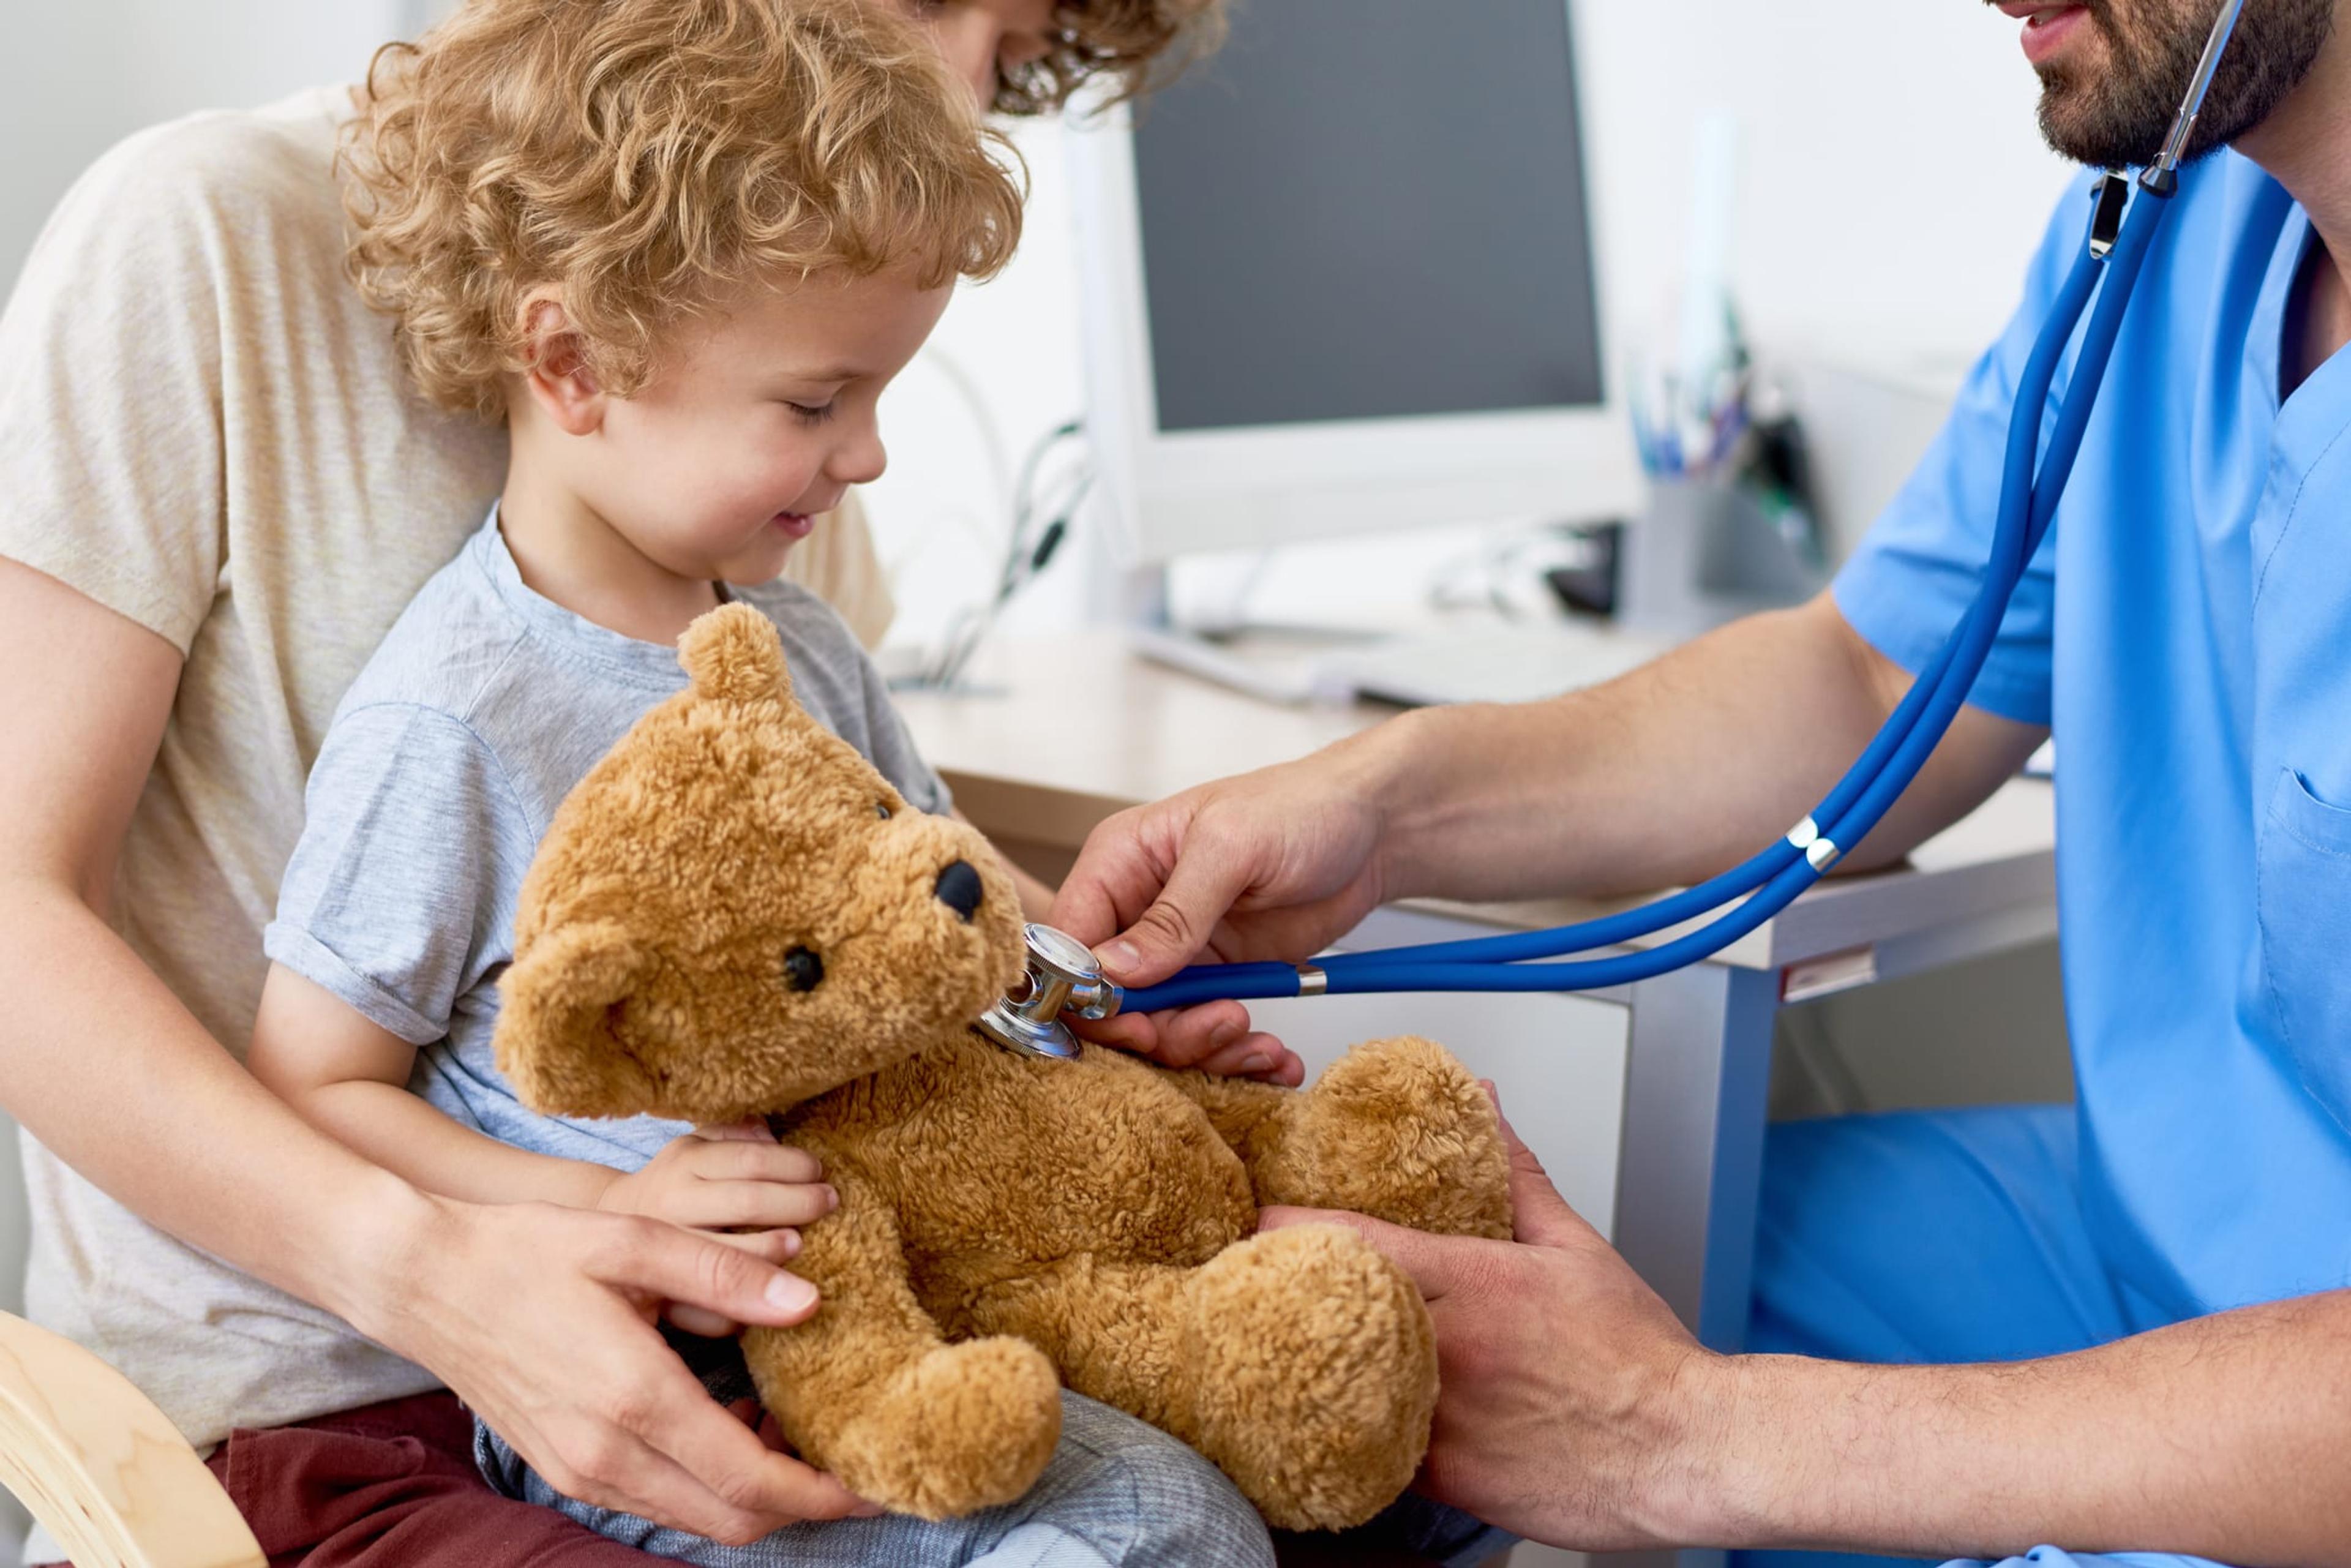 Image of doctor using stethoscope on teddy bear being held by toddler in his mother's lap.